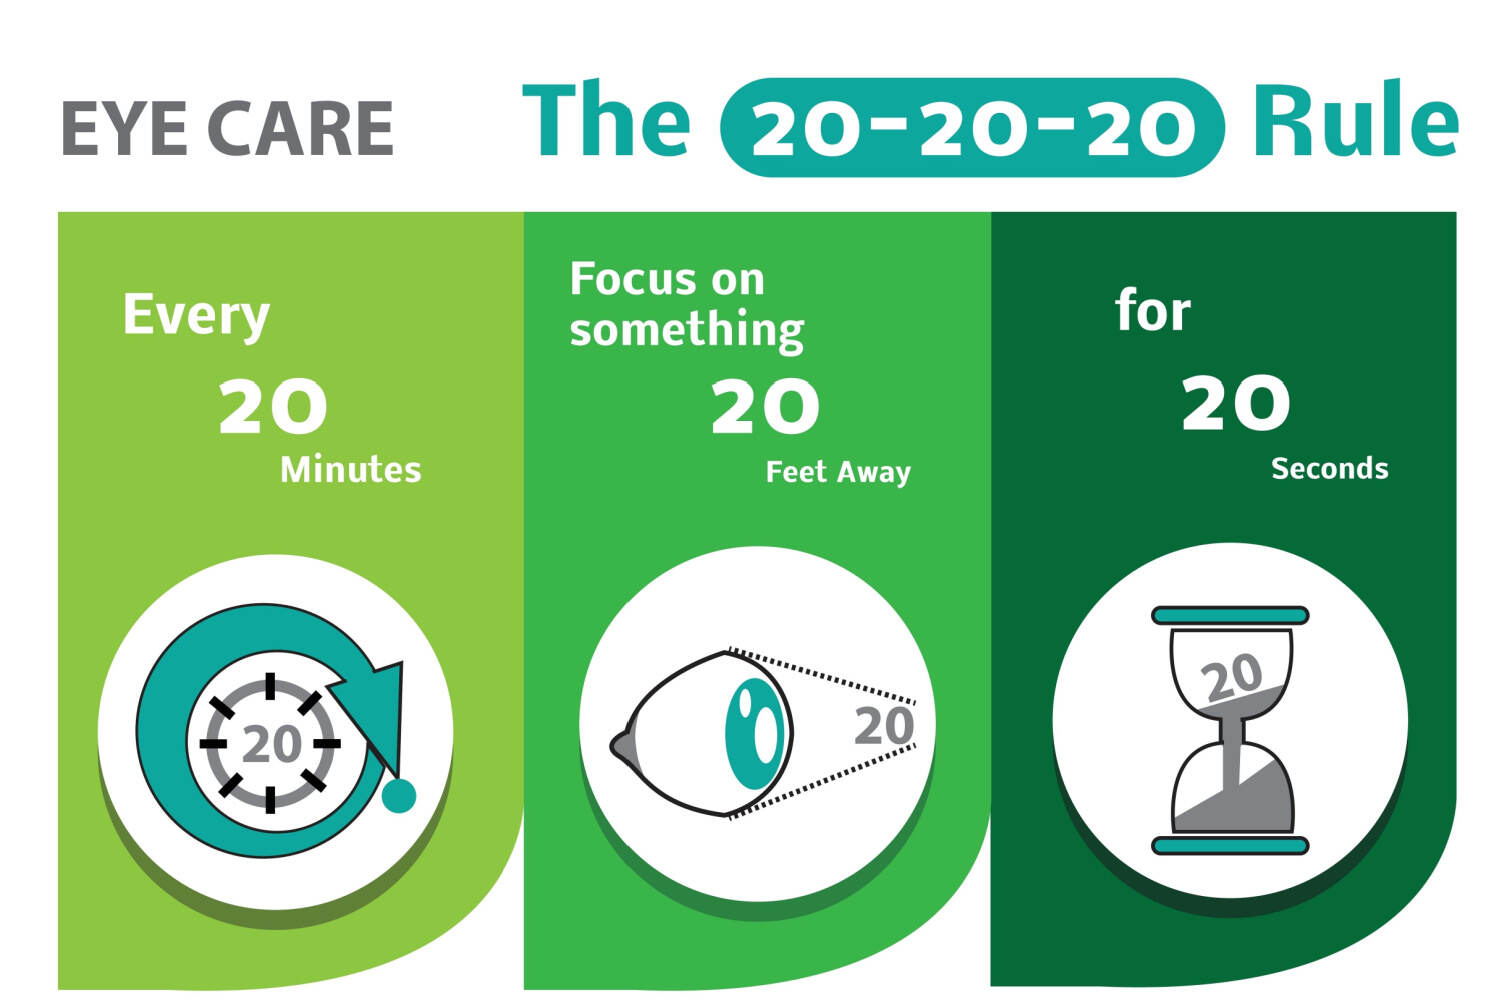 20-20-20 rule eye exercise can be done by adults as well